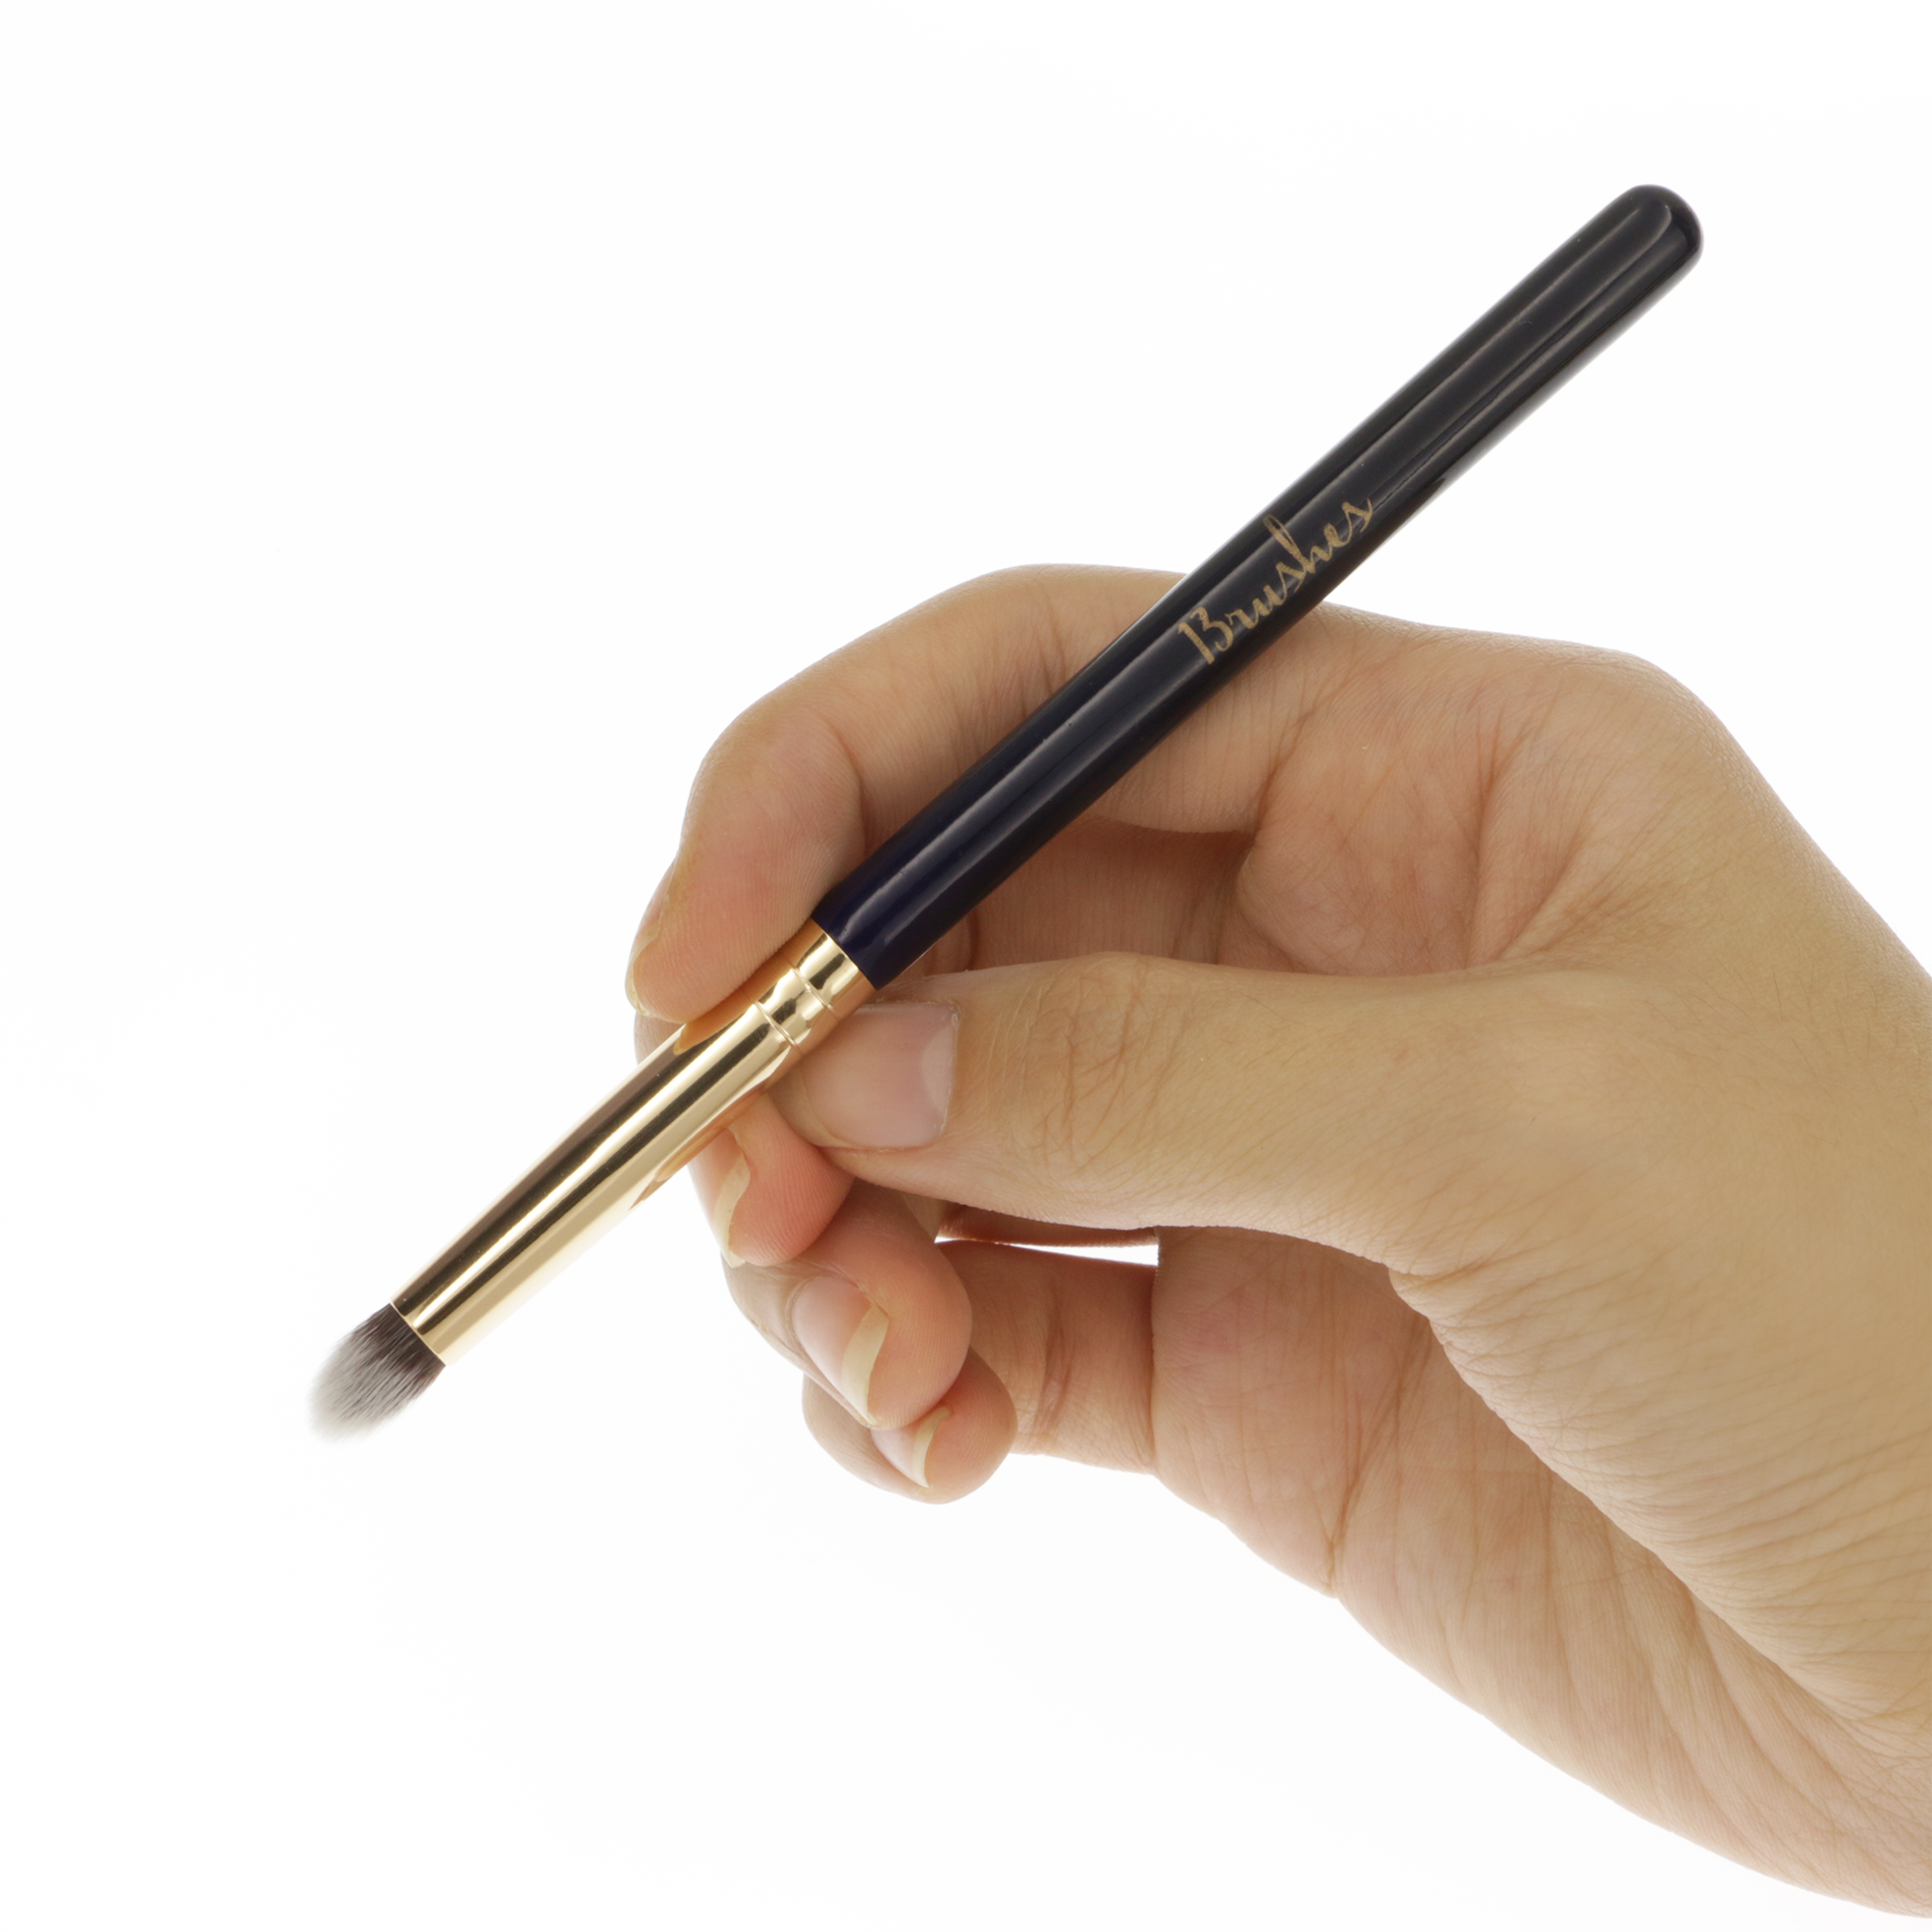 Pencil - 13rushes - Singapore's best makeup brushes